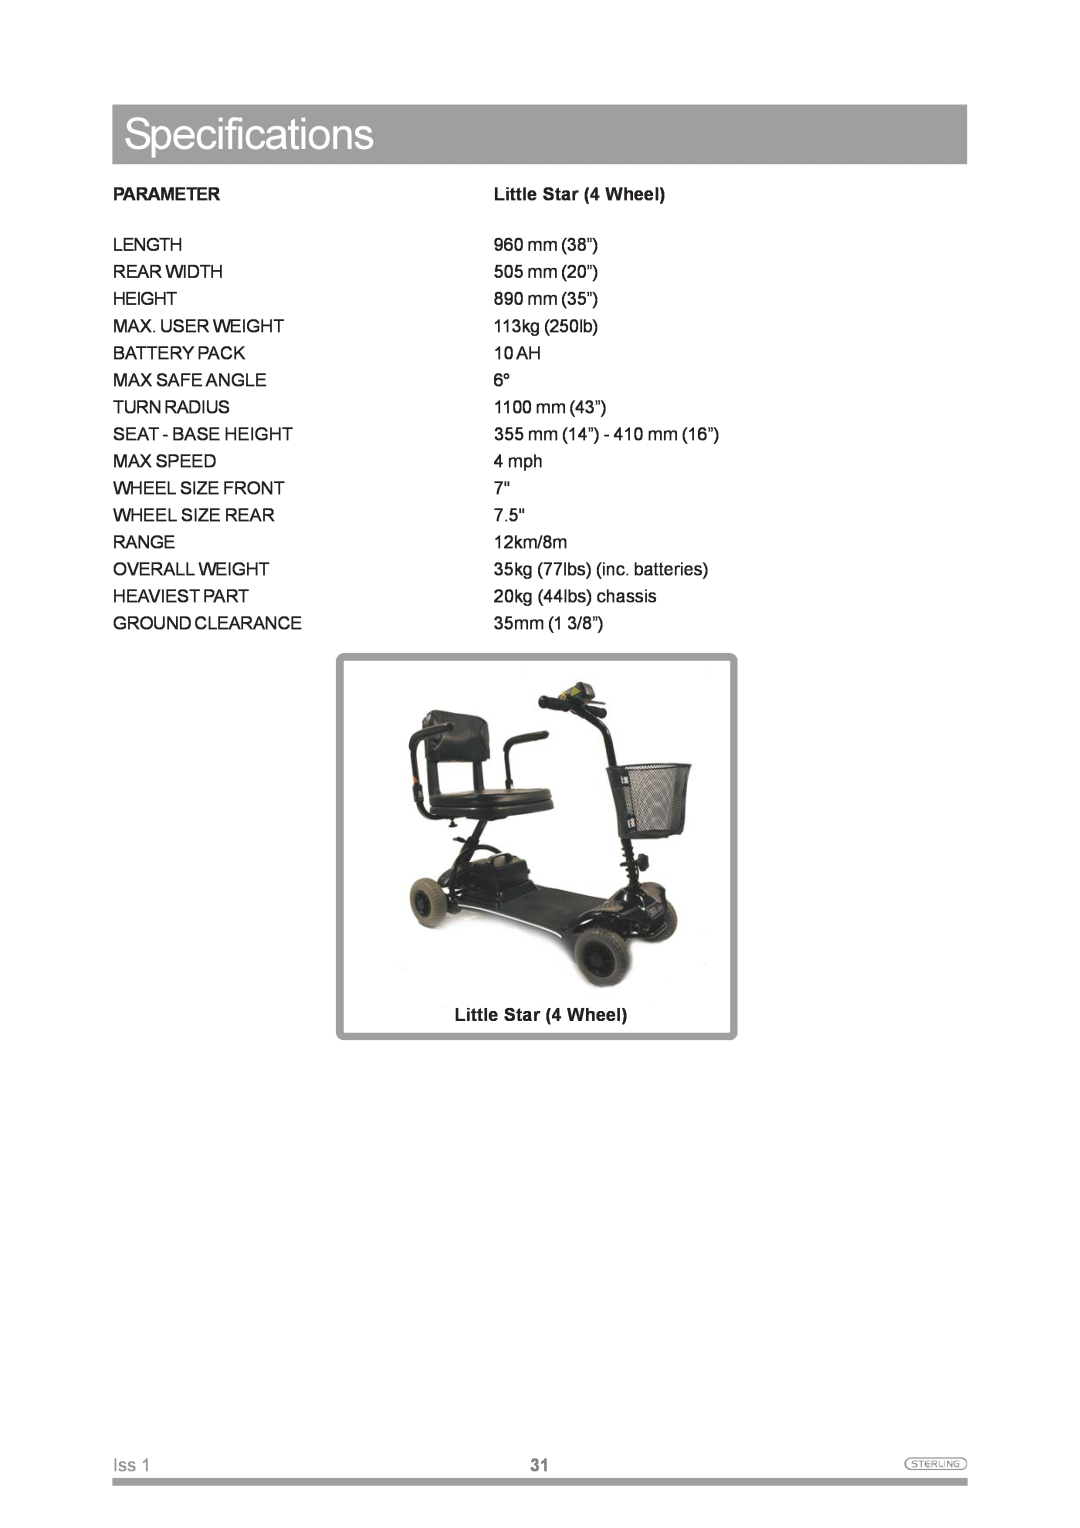 Sunrise Medical Mobility Scooter owner manual Specifications, Parameter, Little Star 4 Wheel 